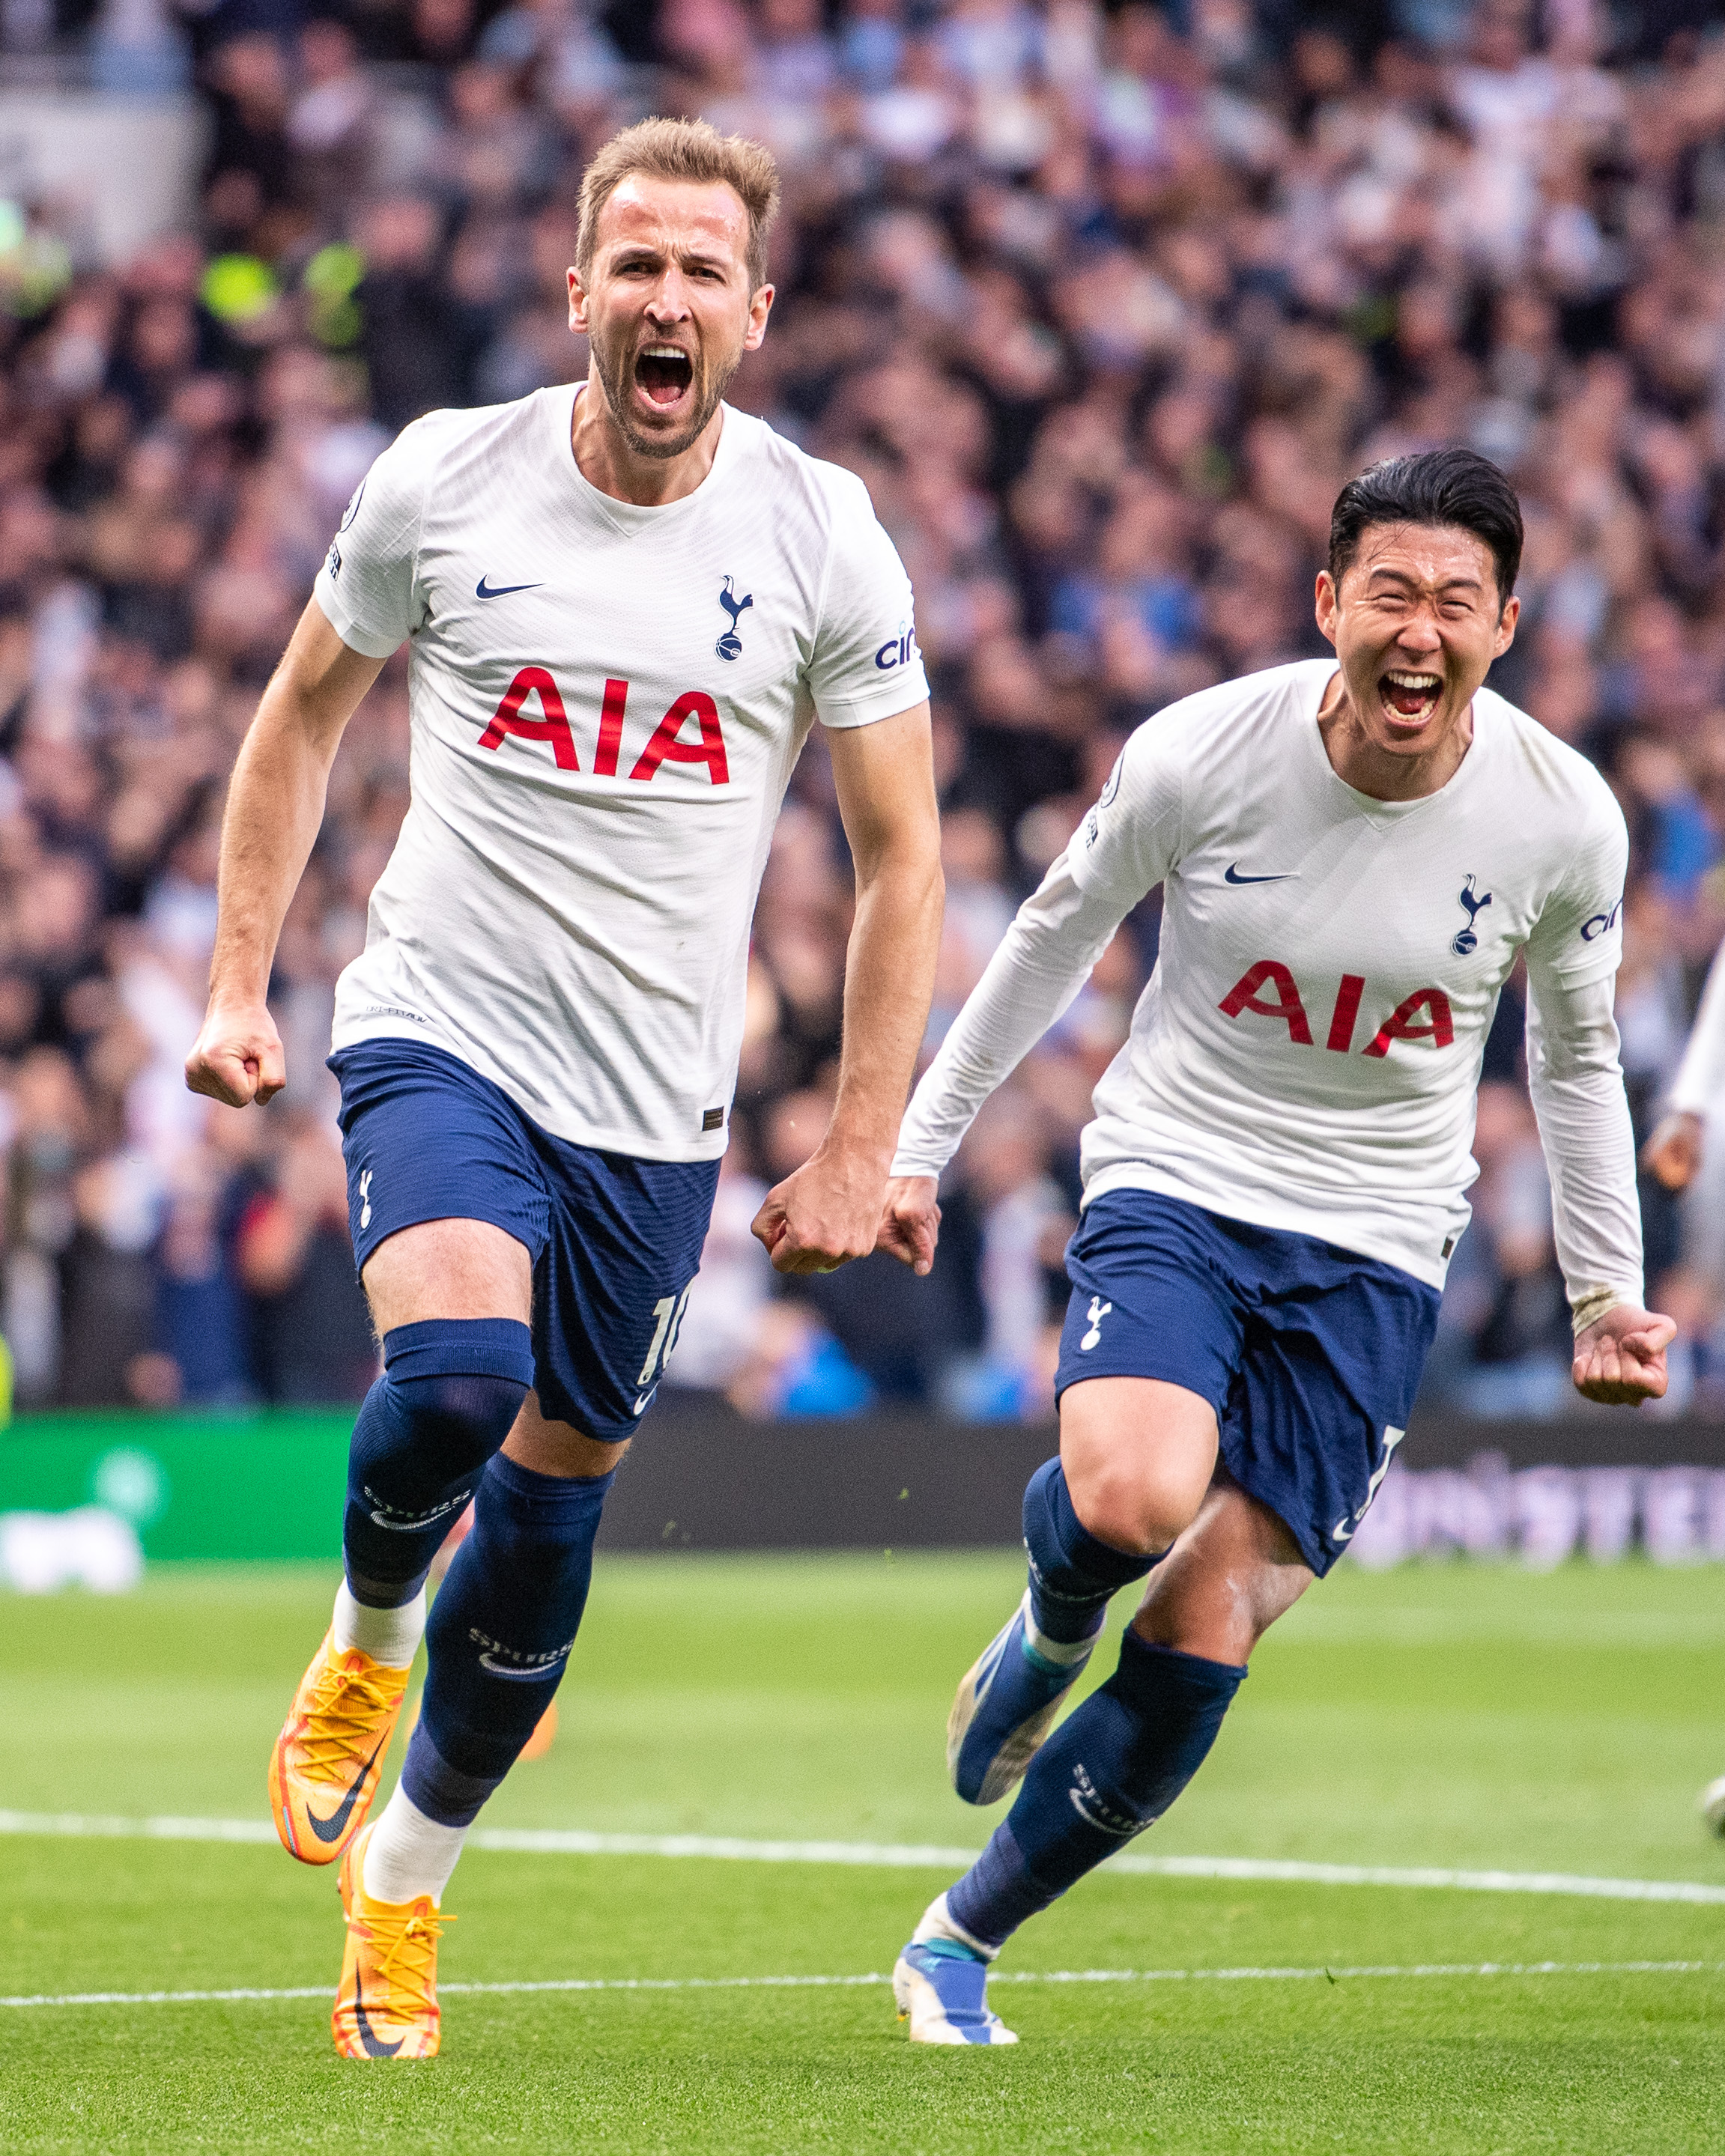 The iconic due assisted 37 goals for each other at Spurs